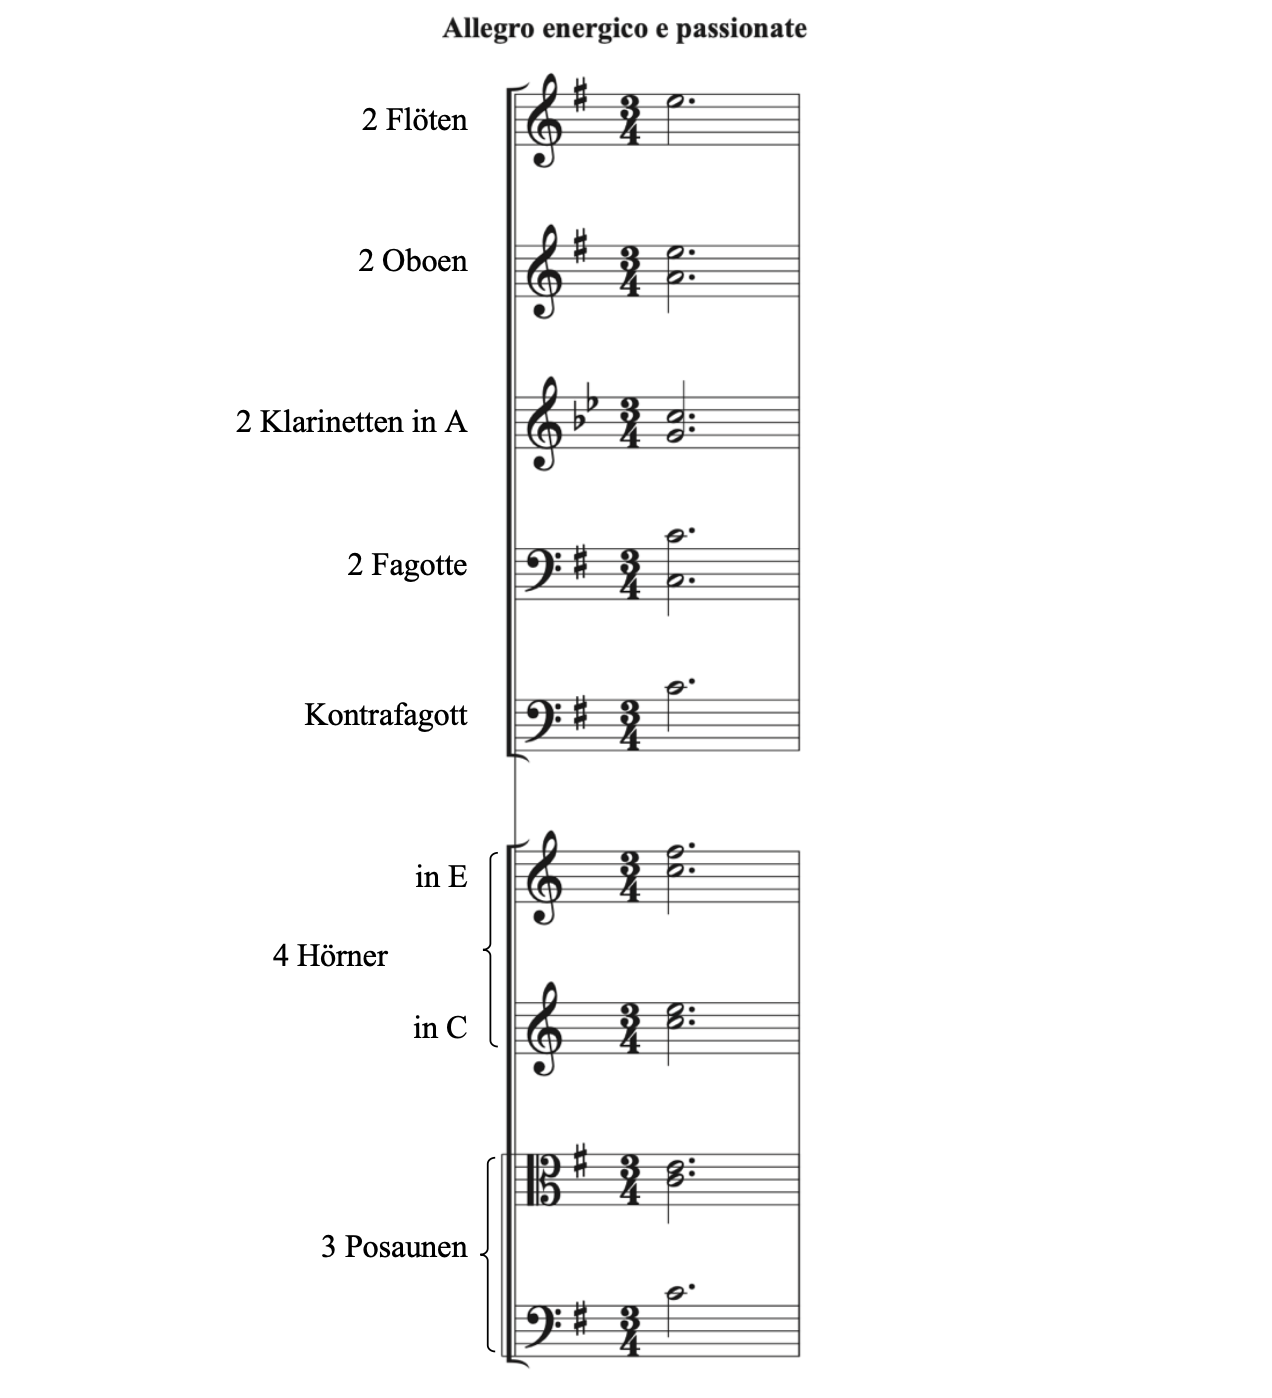 Score from Brahms, Symphony No. 4, fourth movement